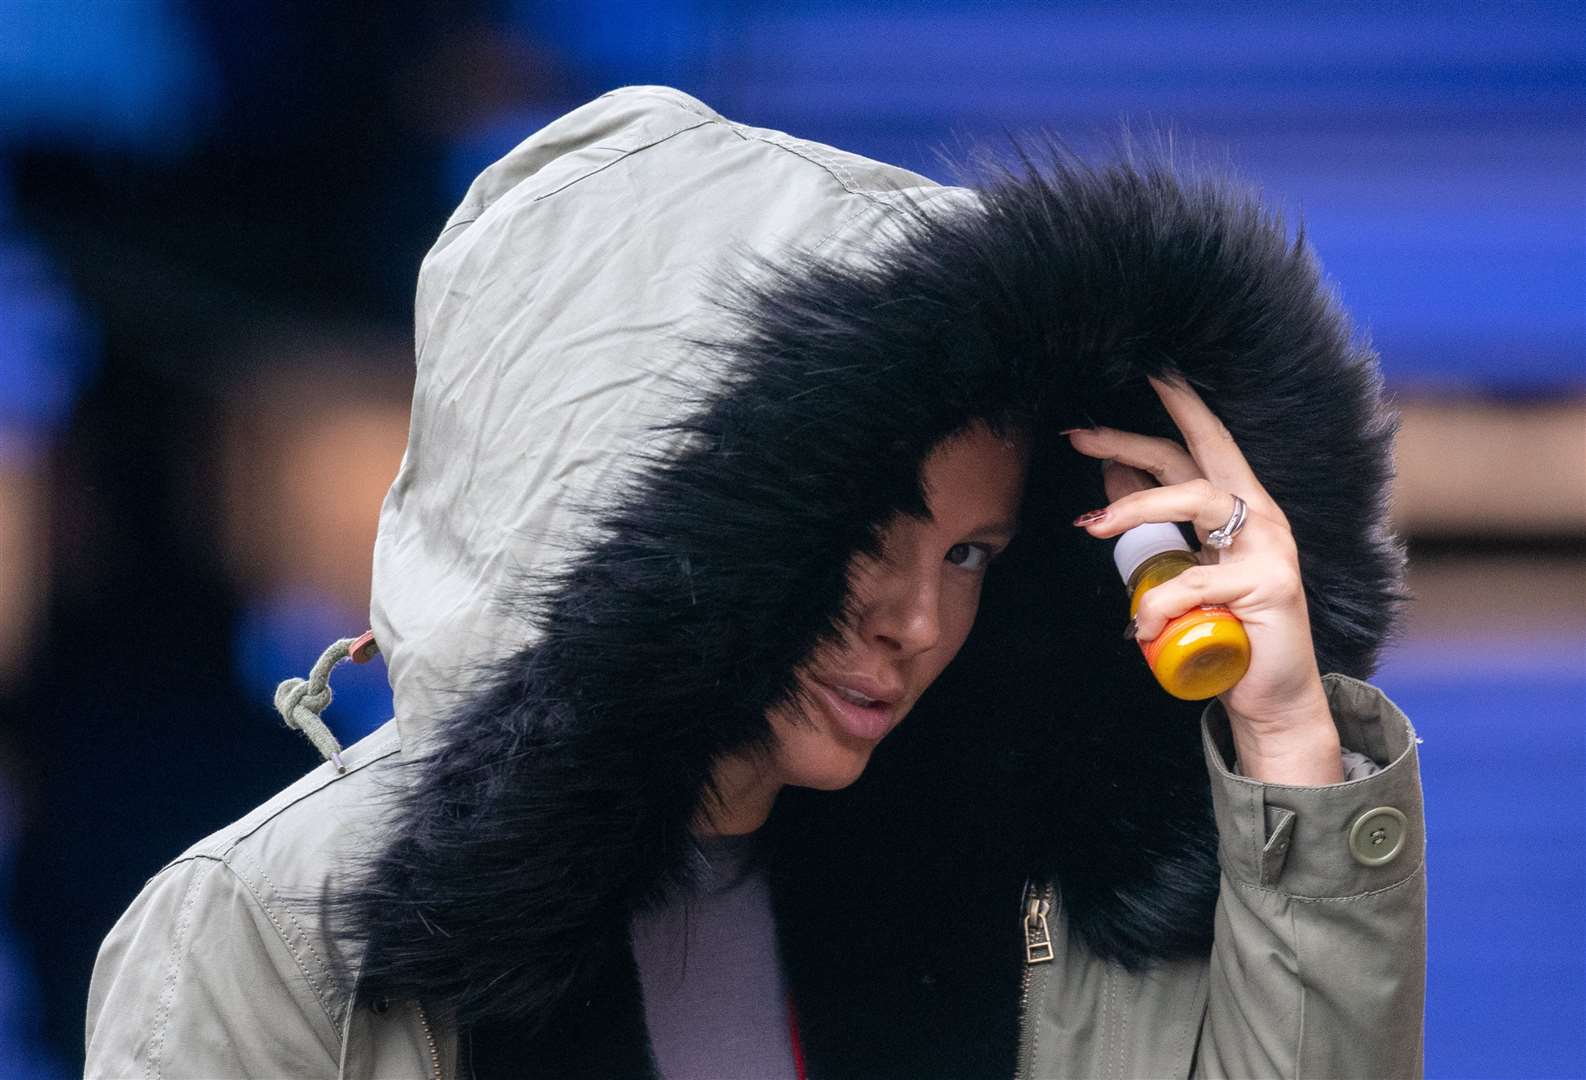 Rebekah Vardy arrives for a Dancing On Ice training session at the National Ice Centre in Nottingham (Joe Giddens/PA)